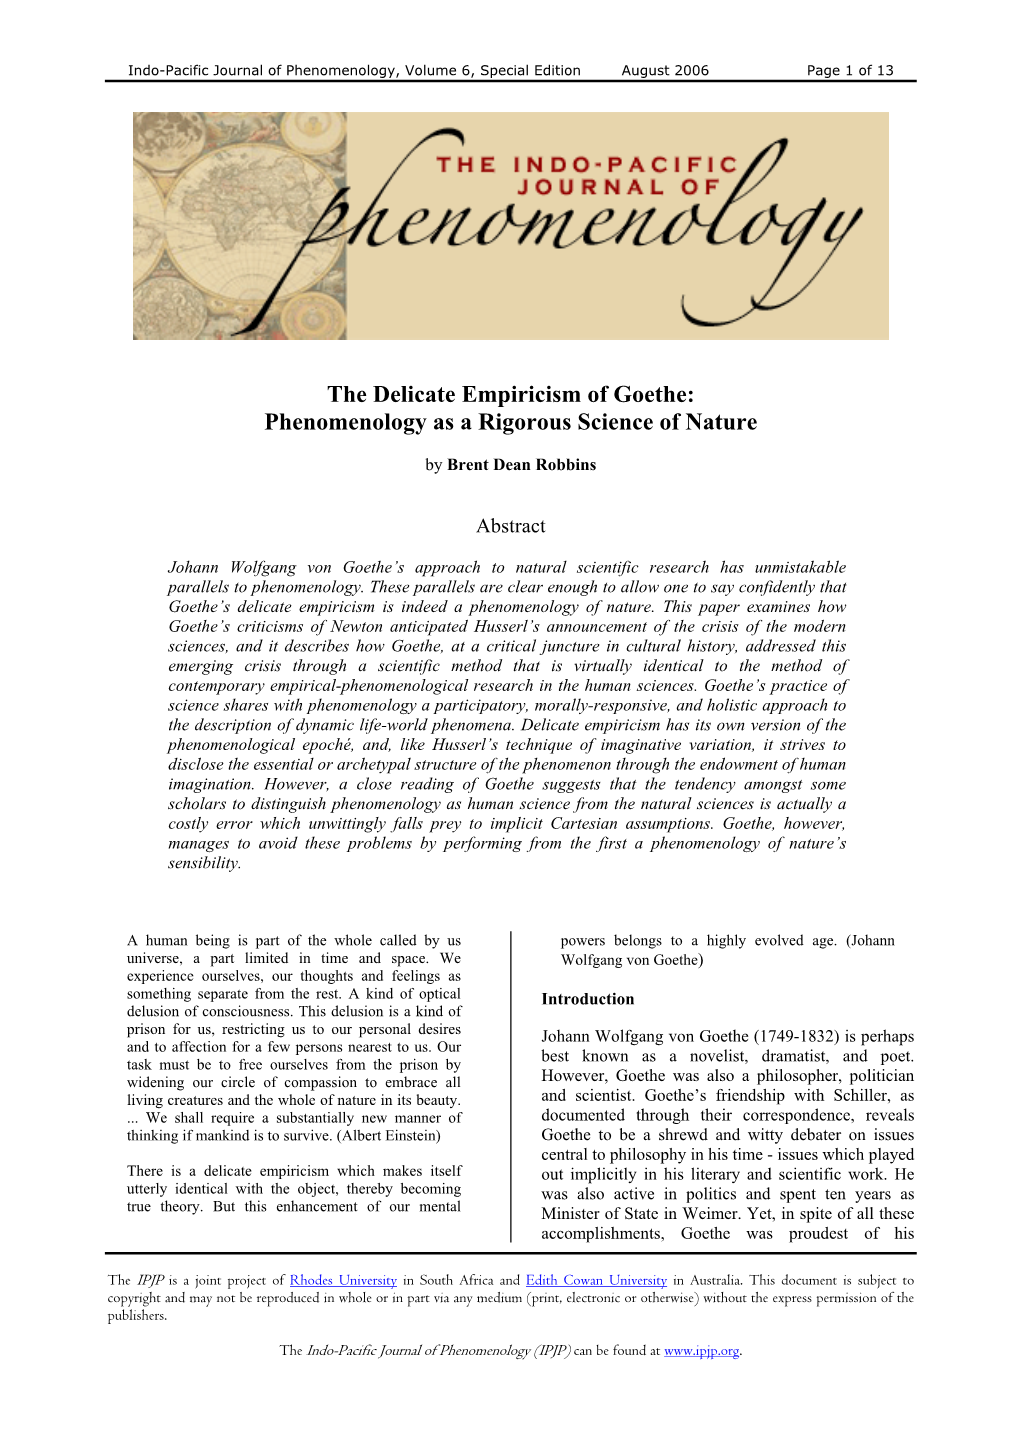 The Delicate Empiricism of Goethe: Phenomenology As a Rigorous Science of Nature